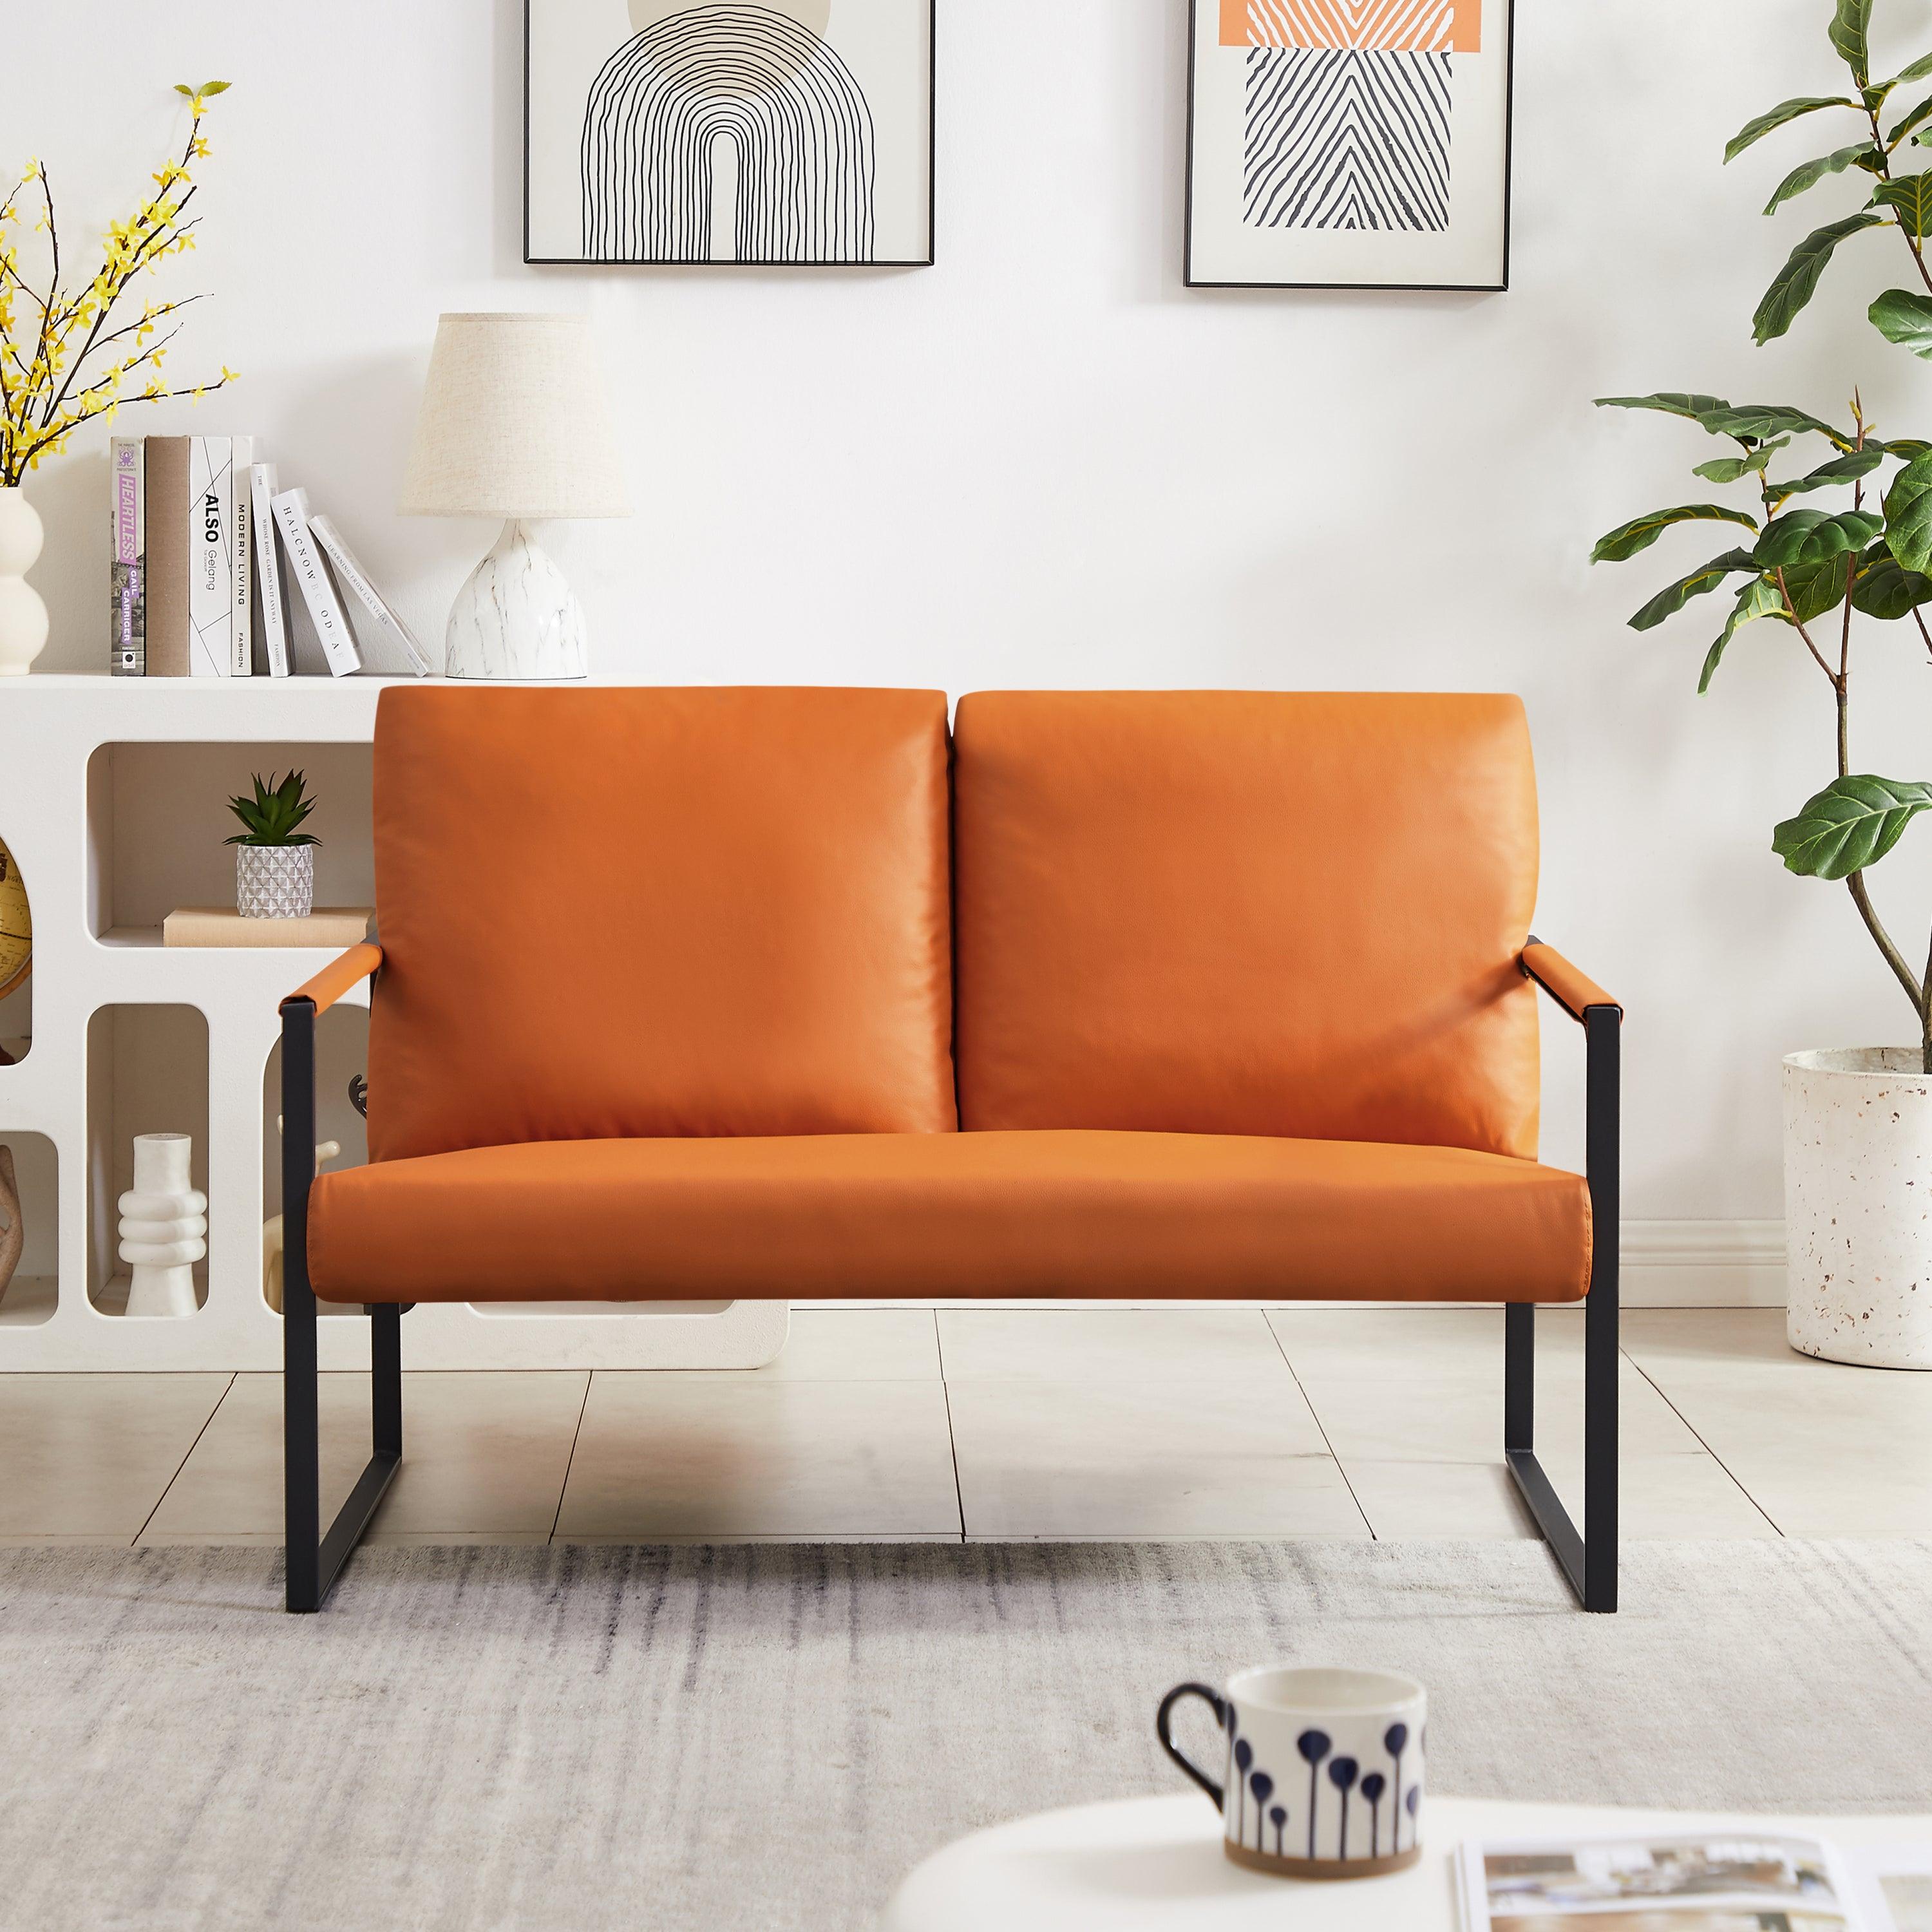 🆓🚛 Lounge, Living Room, Office Or The Reception Area Pvc Leather Accent Arm Chair With Extra Thick Padded Backrest & Seat Cushion Sofa Chairs, Non-Slip Adsorption Feet, Sturdy Metal Frame, Orange